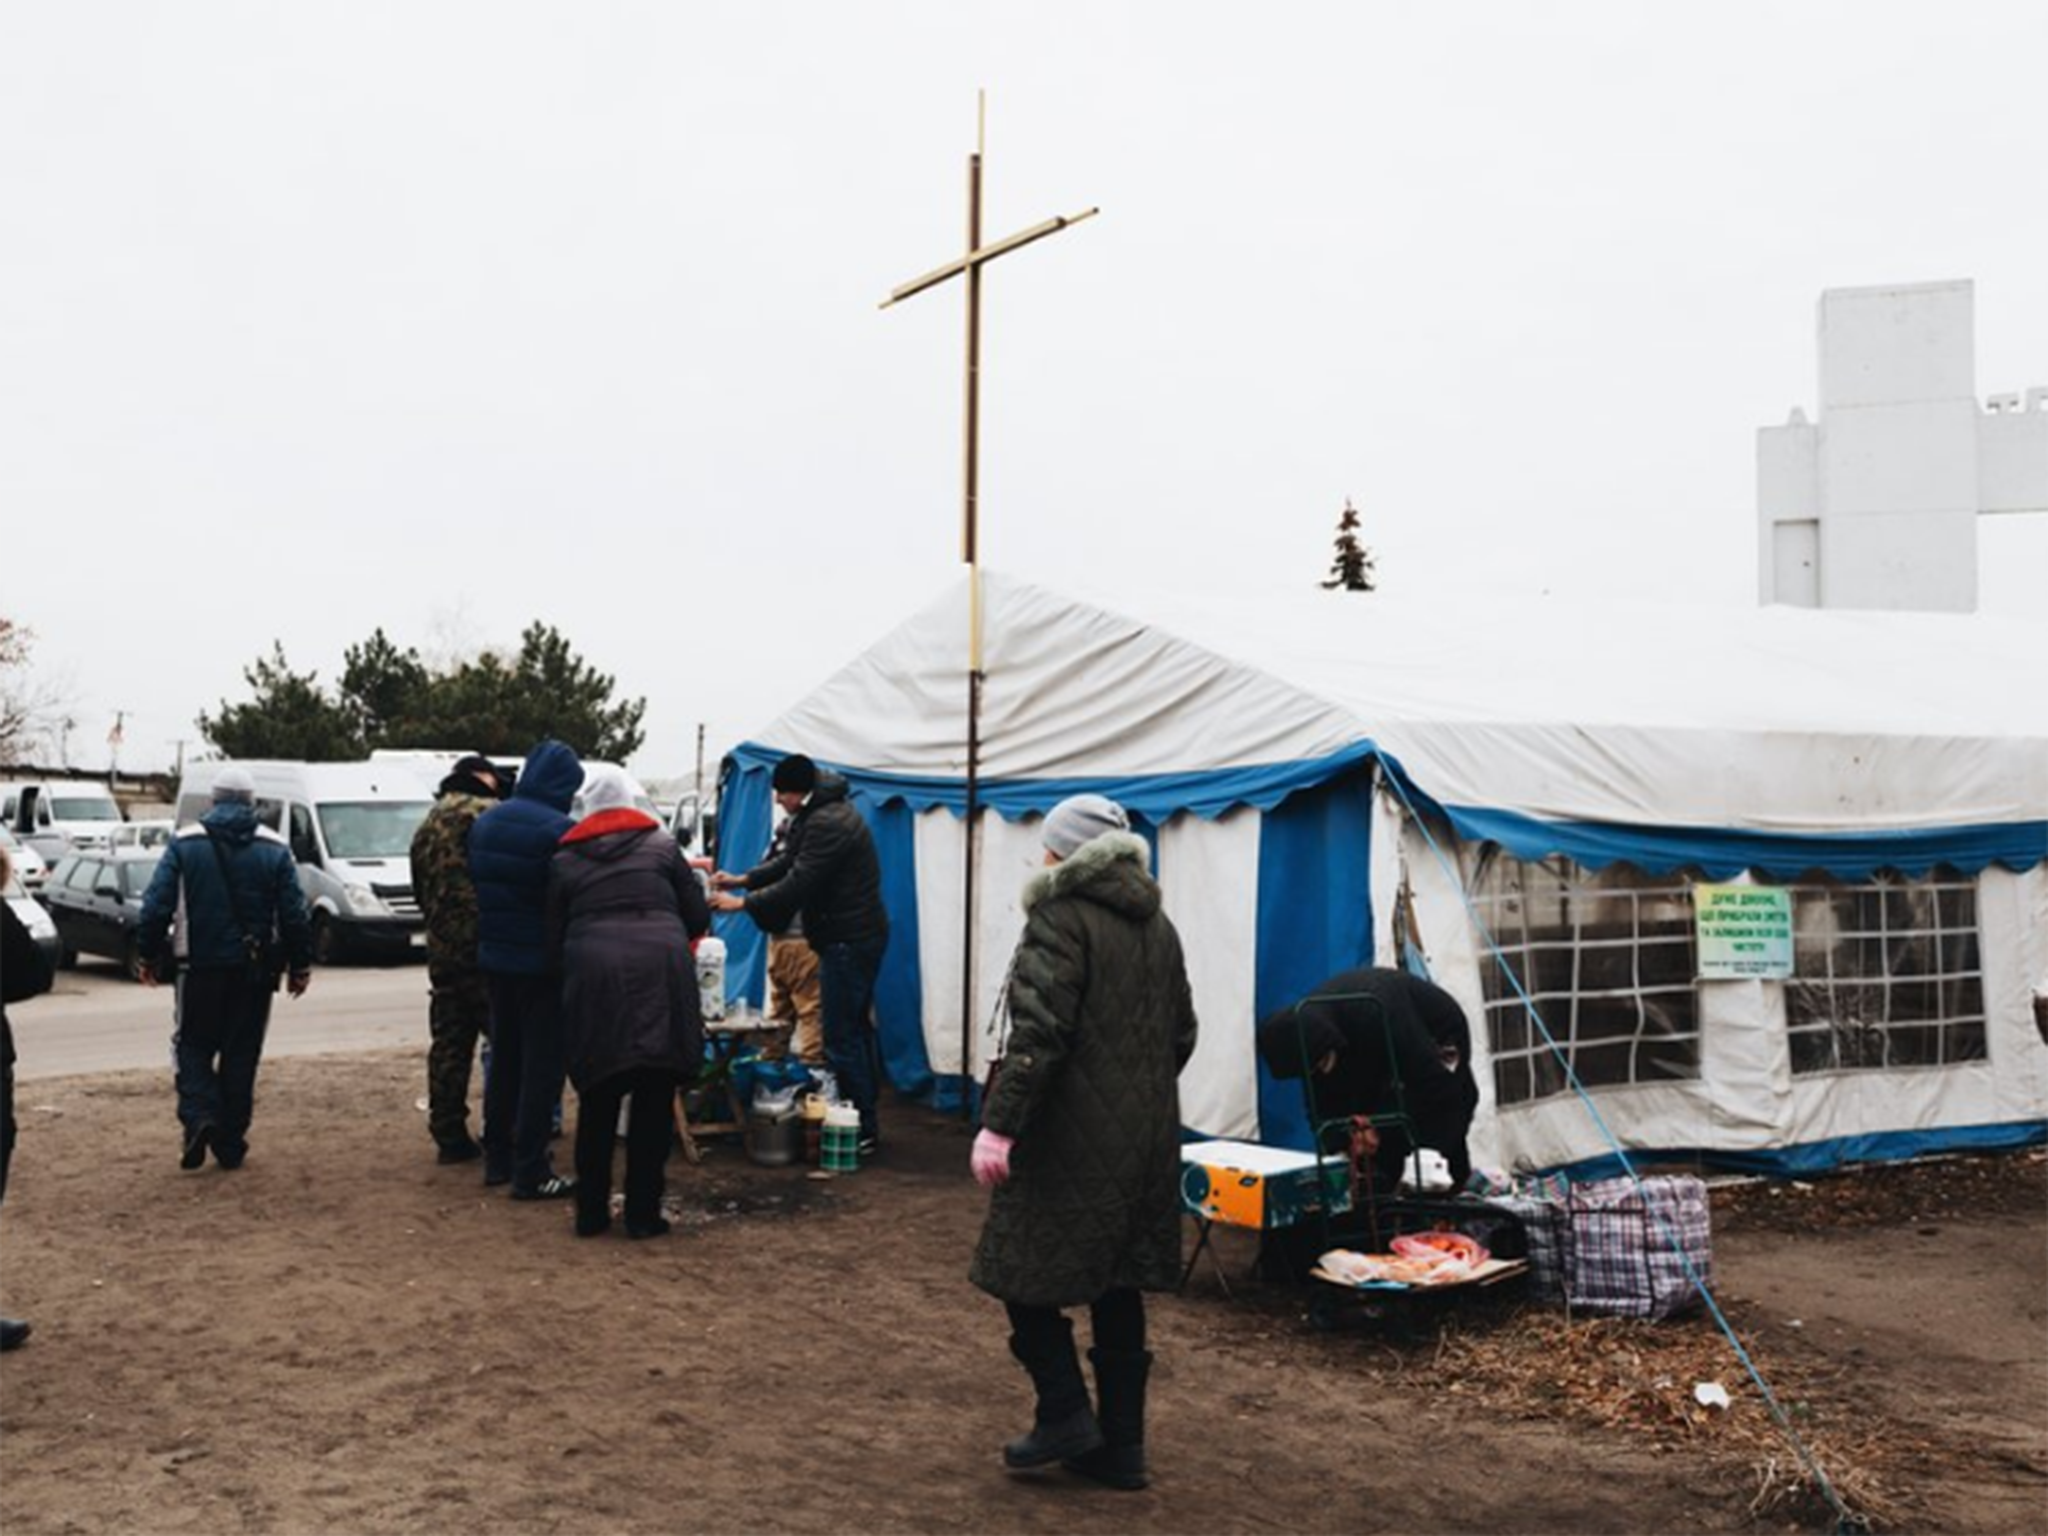 Members crowd outside one of the church’s tents, where services are often held